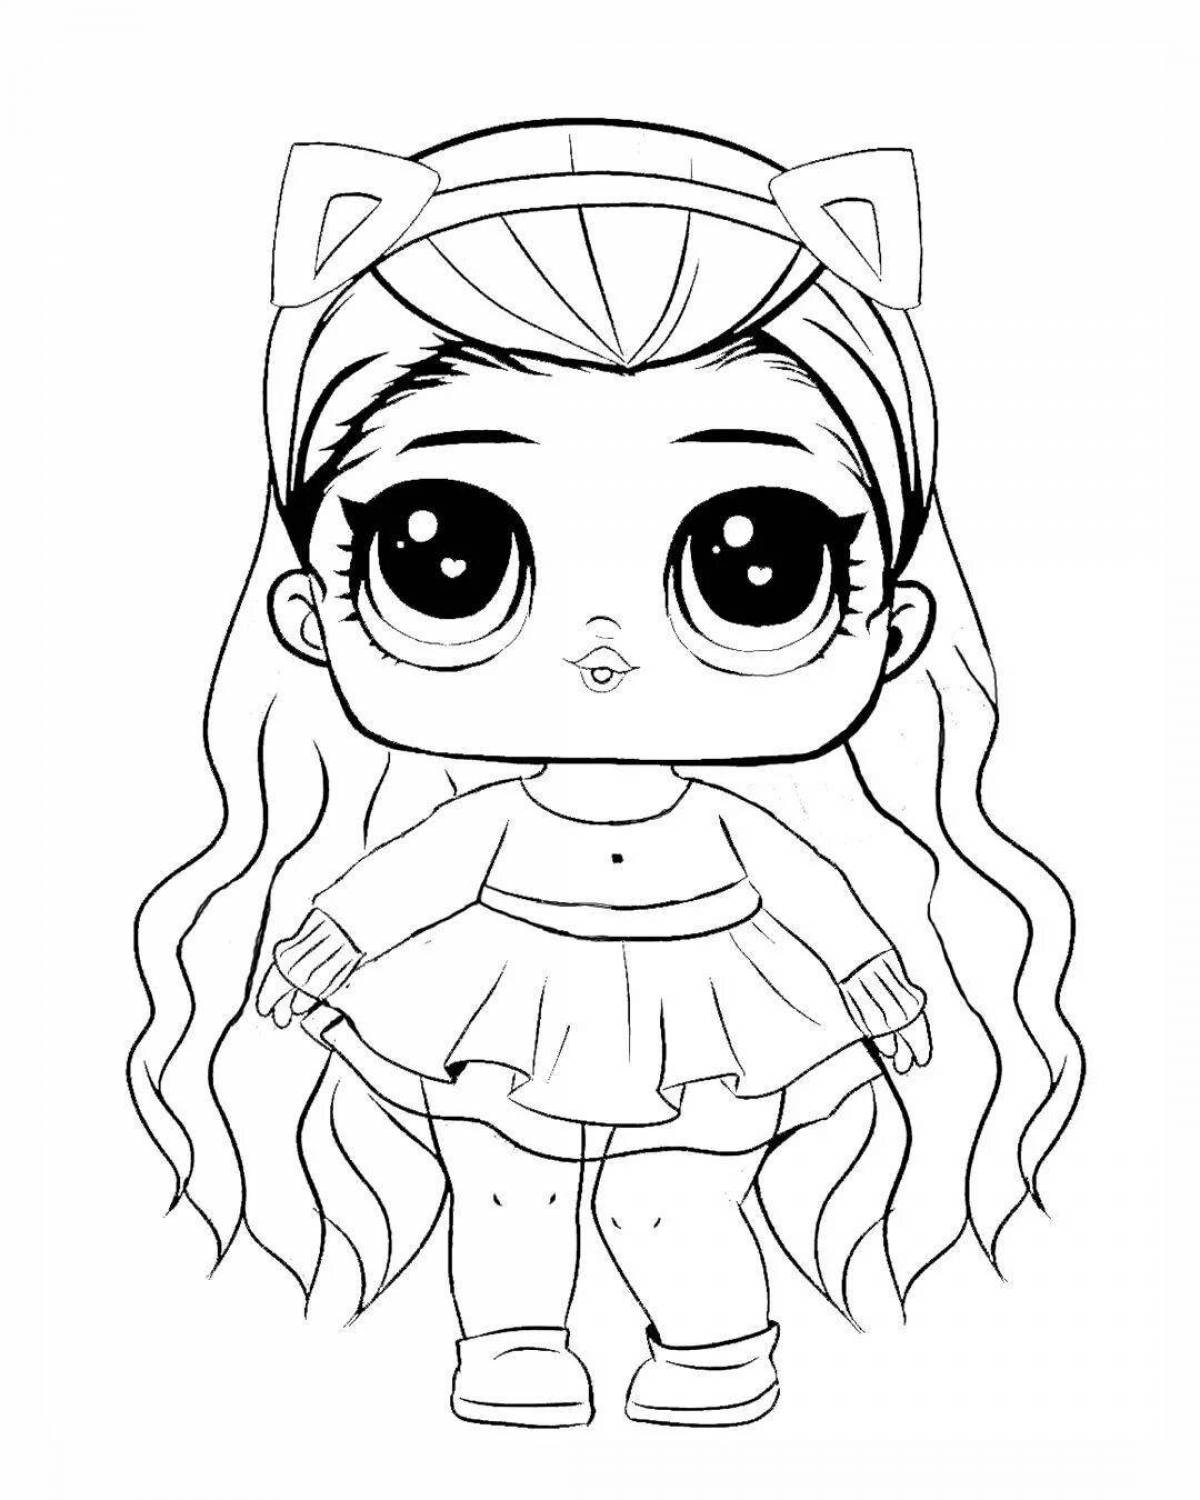 Adorable coloring pages for girls lol dolls